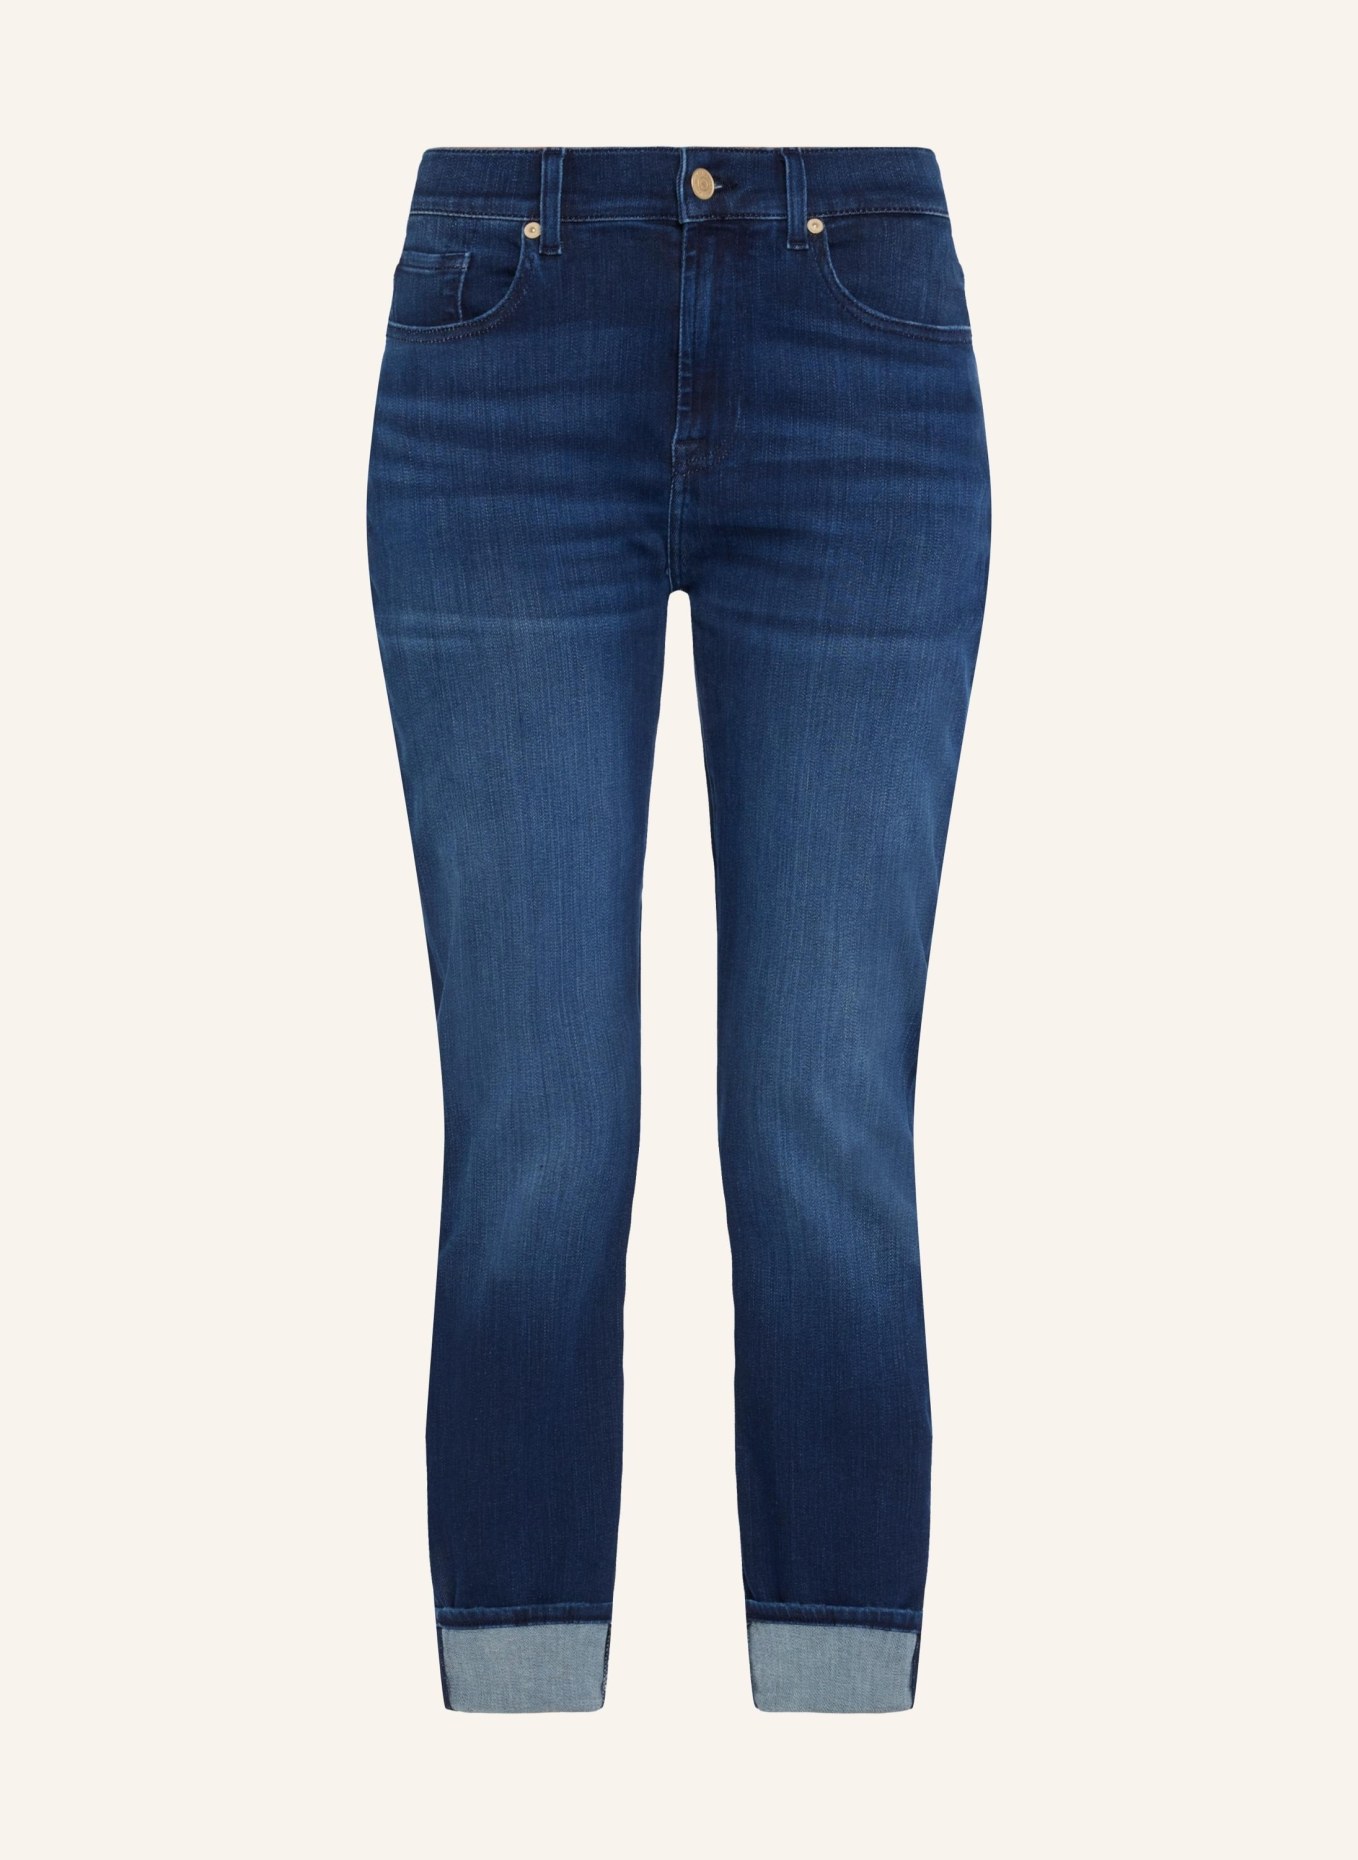 7 for all mankind Jeans RELAXED SKINNY Skinny fit, Farbe: BLAU (Bild 1)